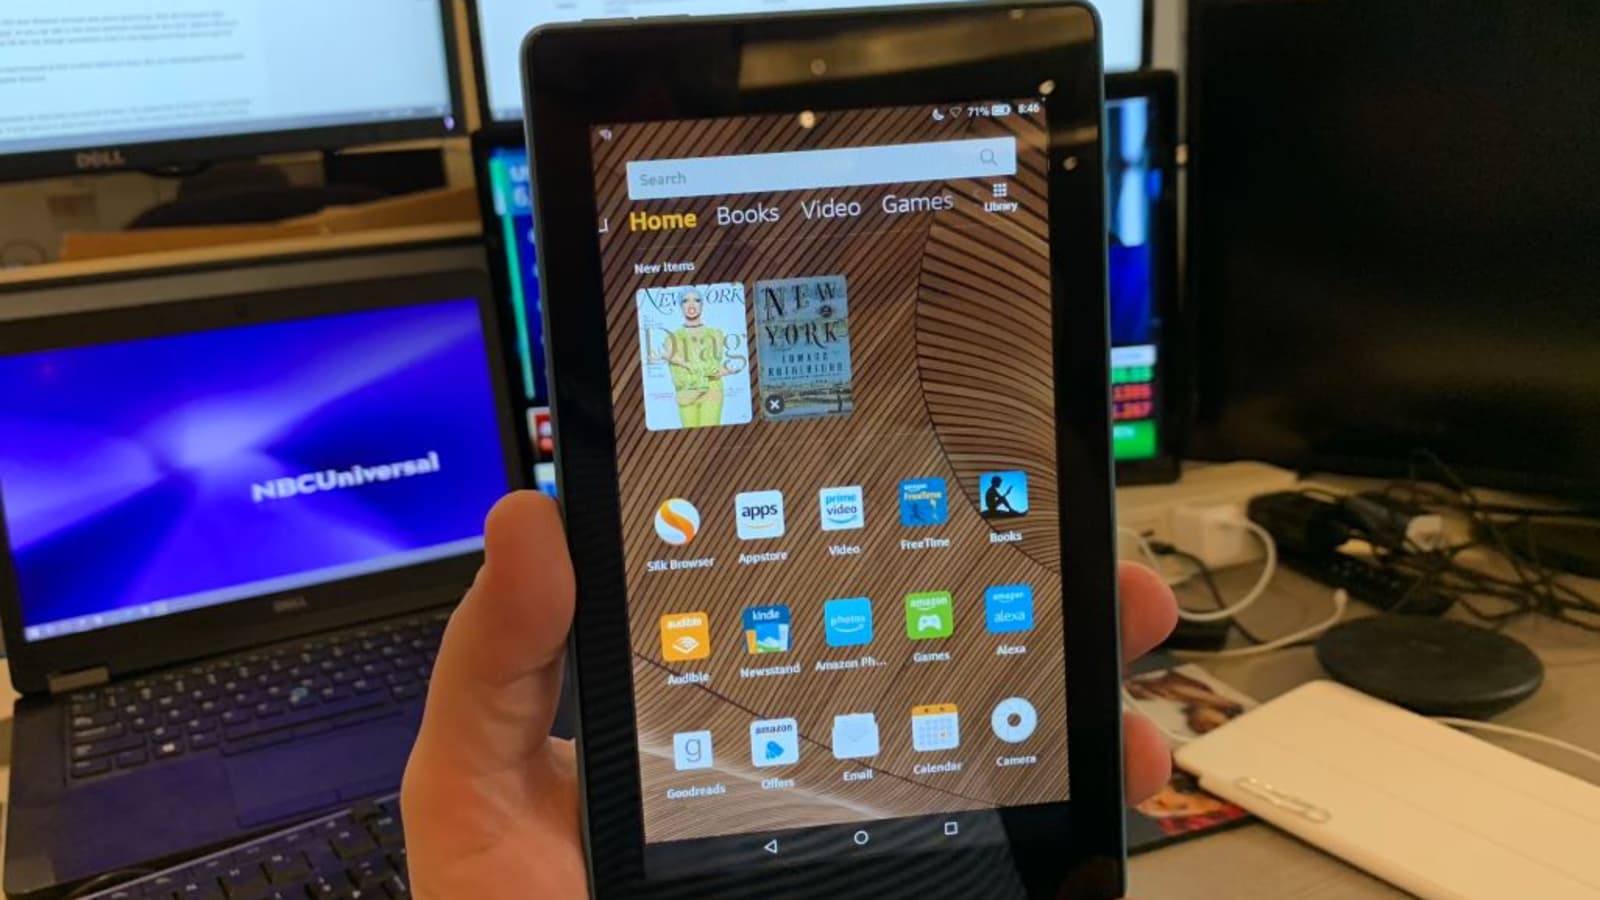 Amazon Fire 7 2019 Tablet Review Skip It Buy Fire Hd8 Instead - how to update roblox game on fire tablet